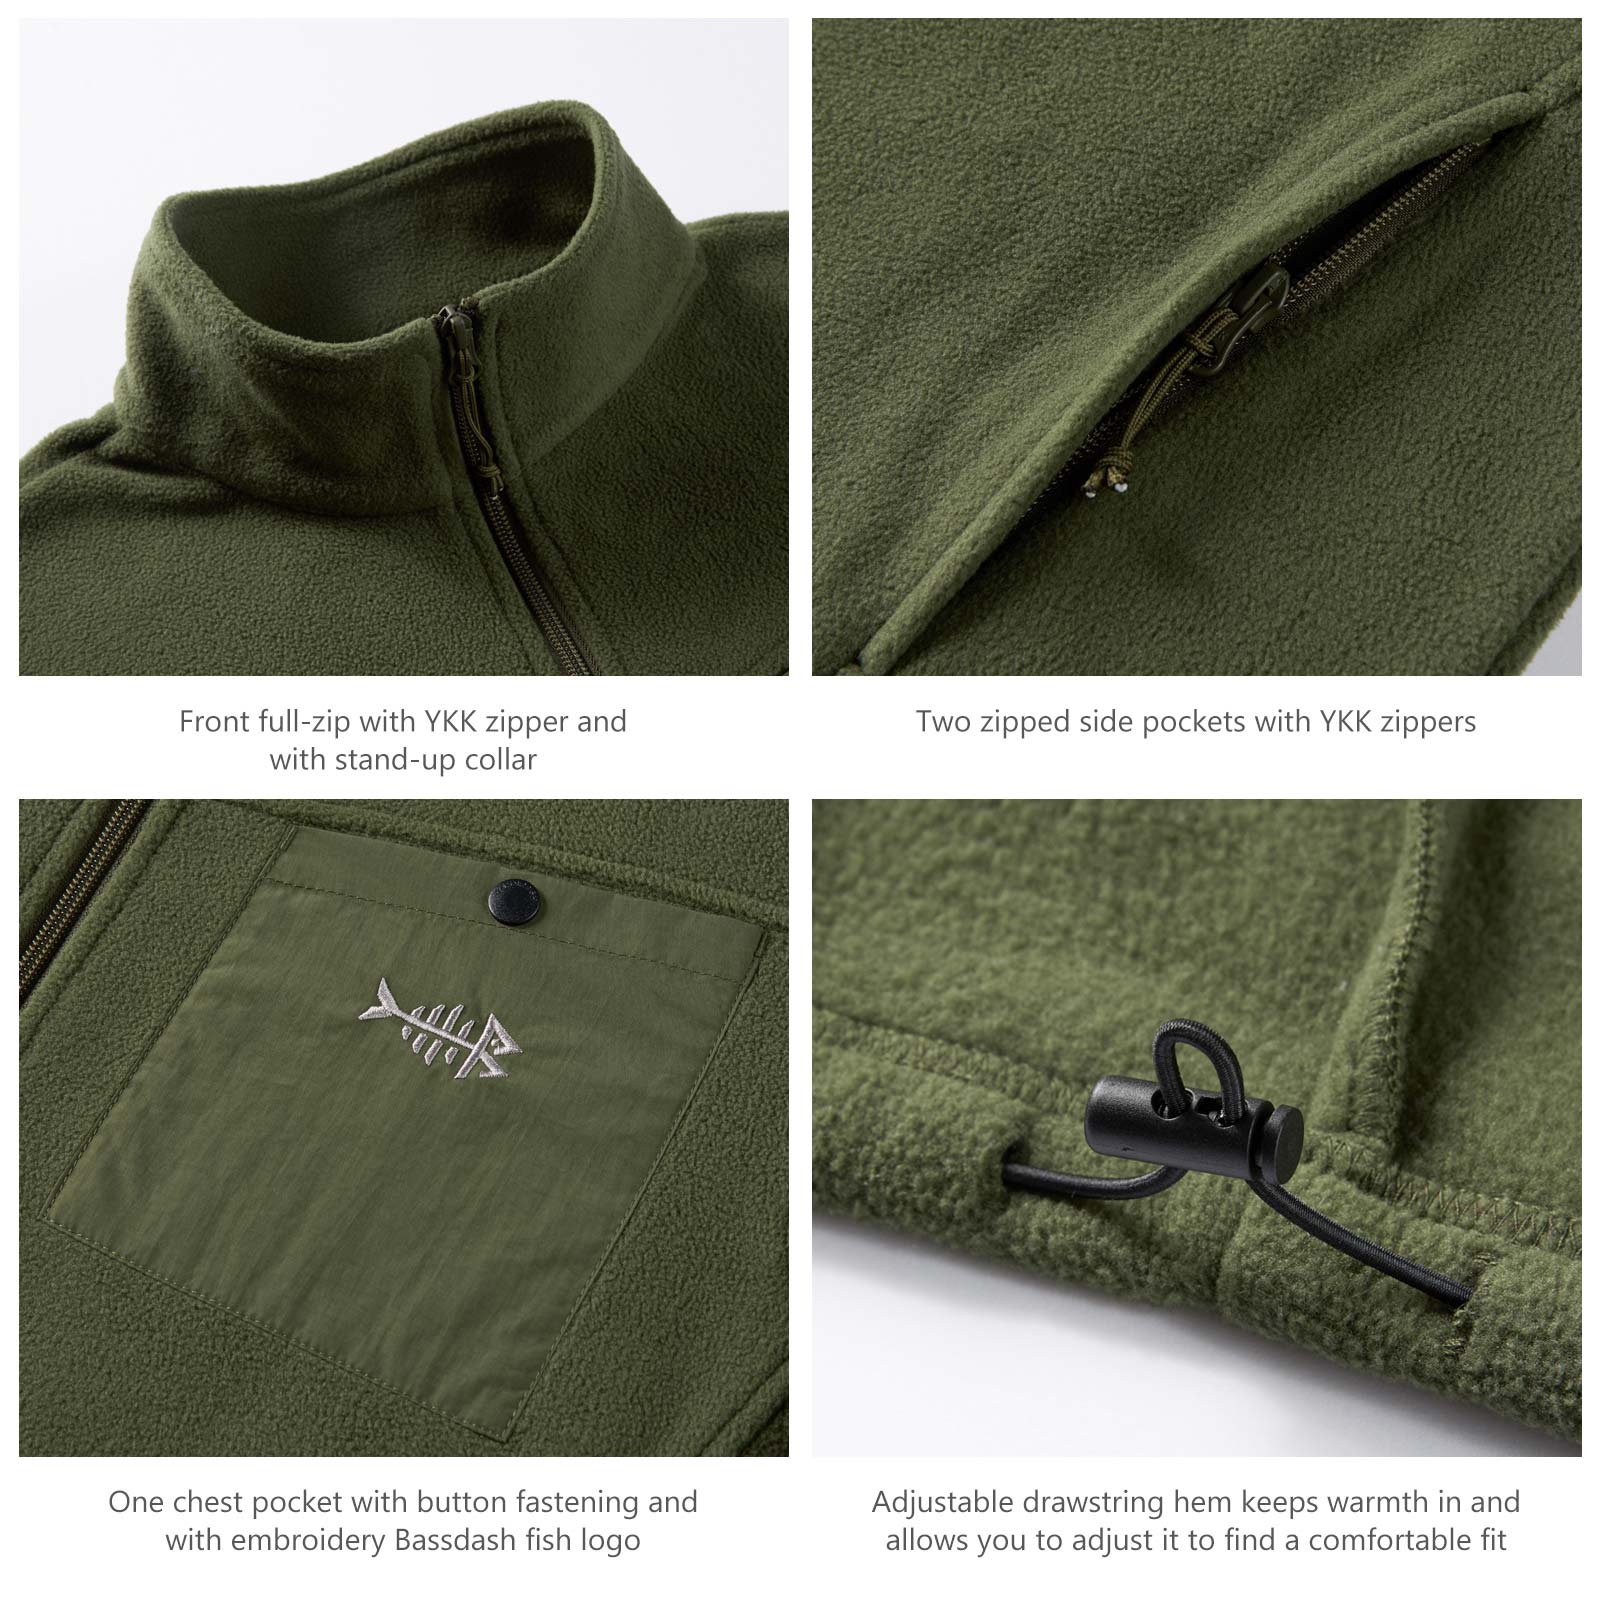 Thicken Fleece Jacket Men, Cozy Fashion Men's Winter Jacket, Windproof  Transition Jacket Men for Outside (Color : Army Green, Size : Large)